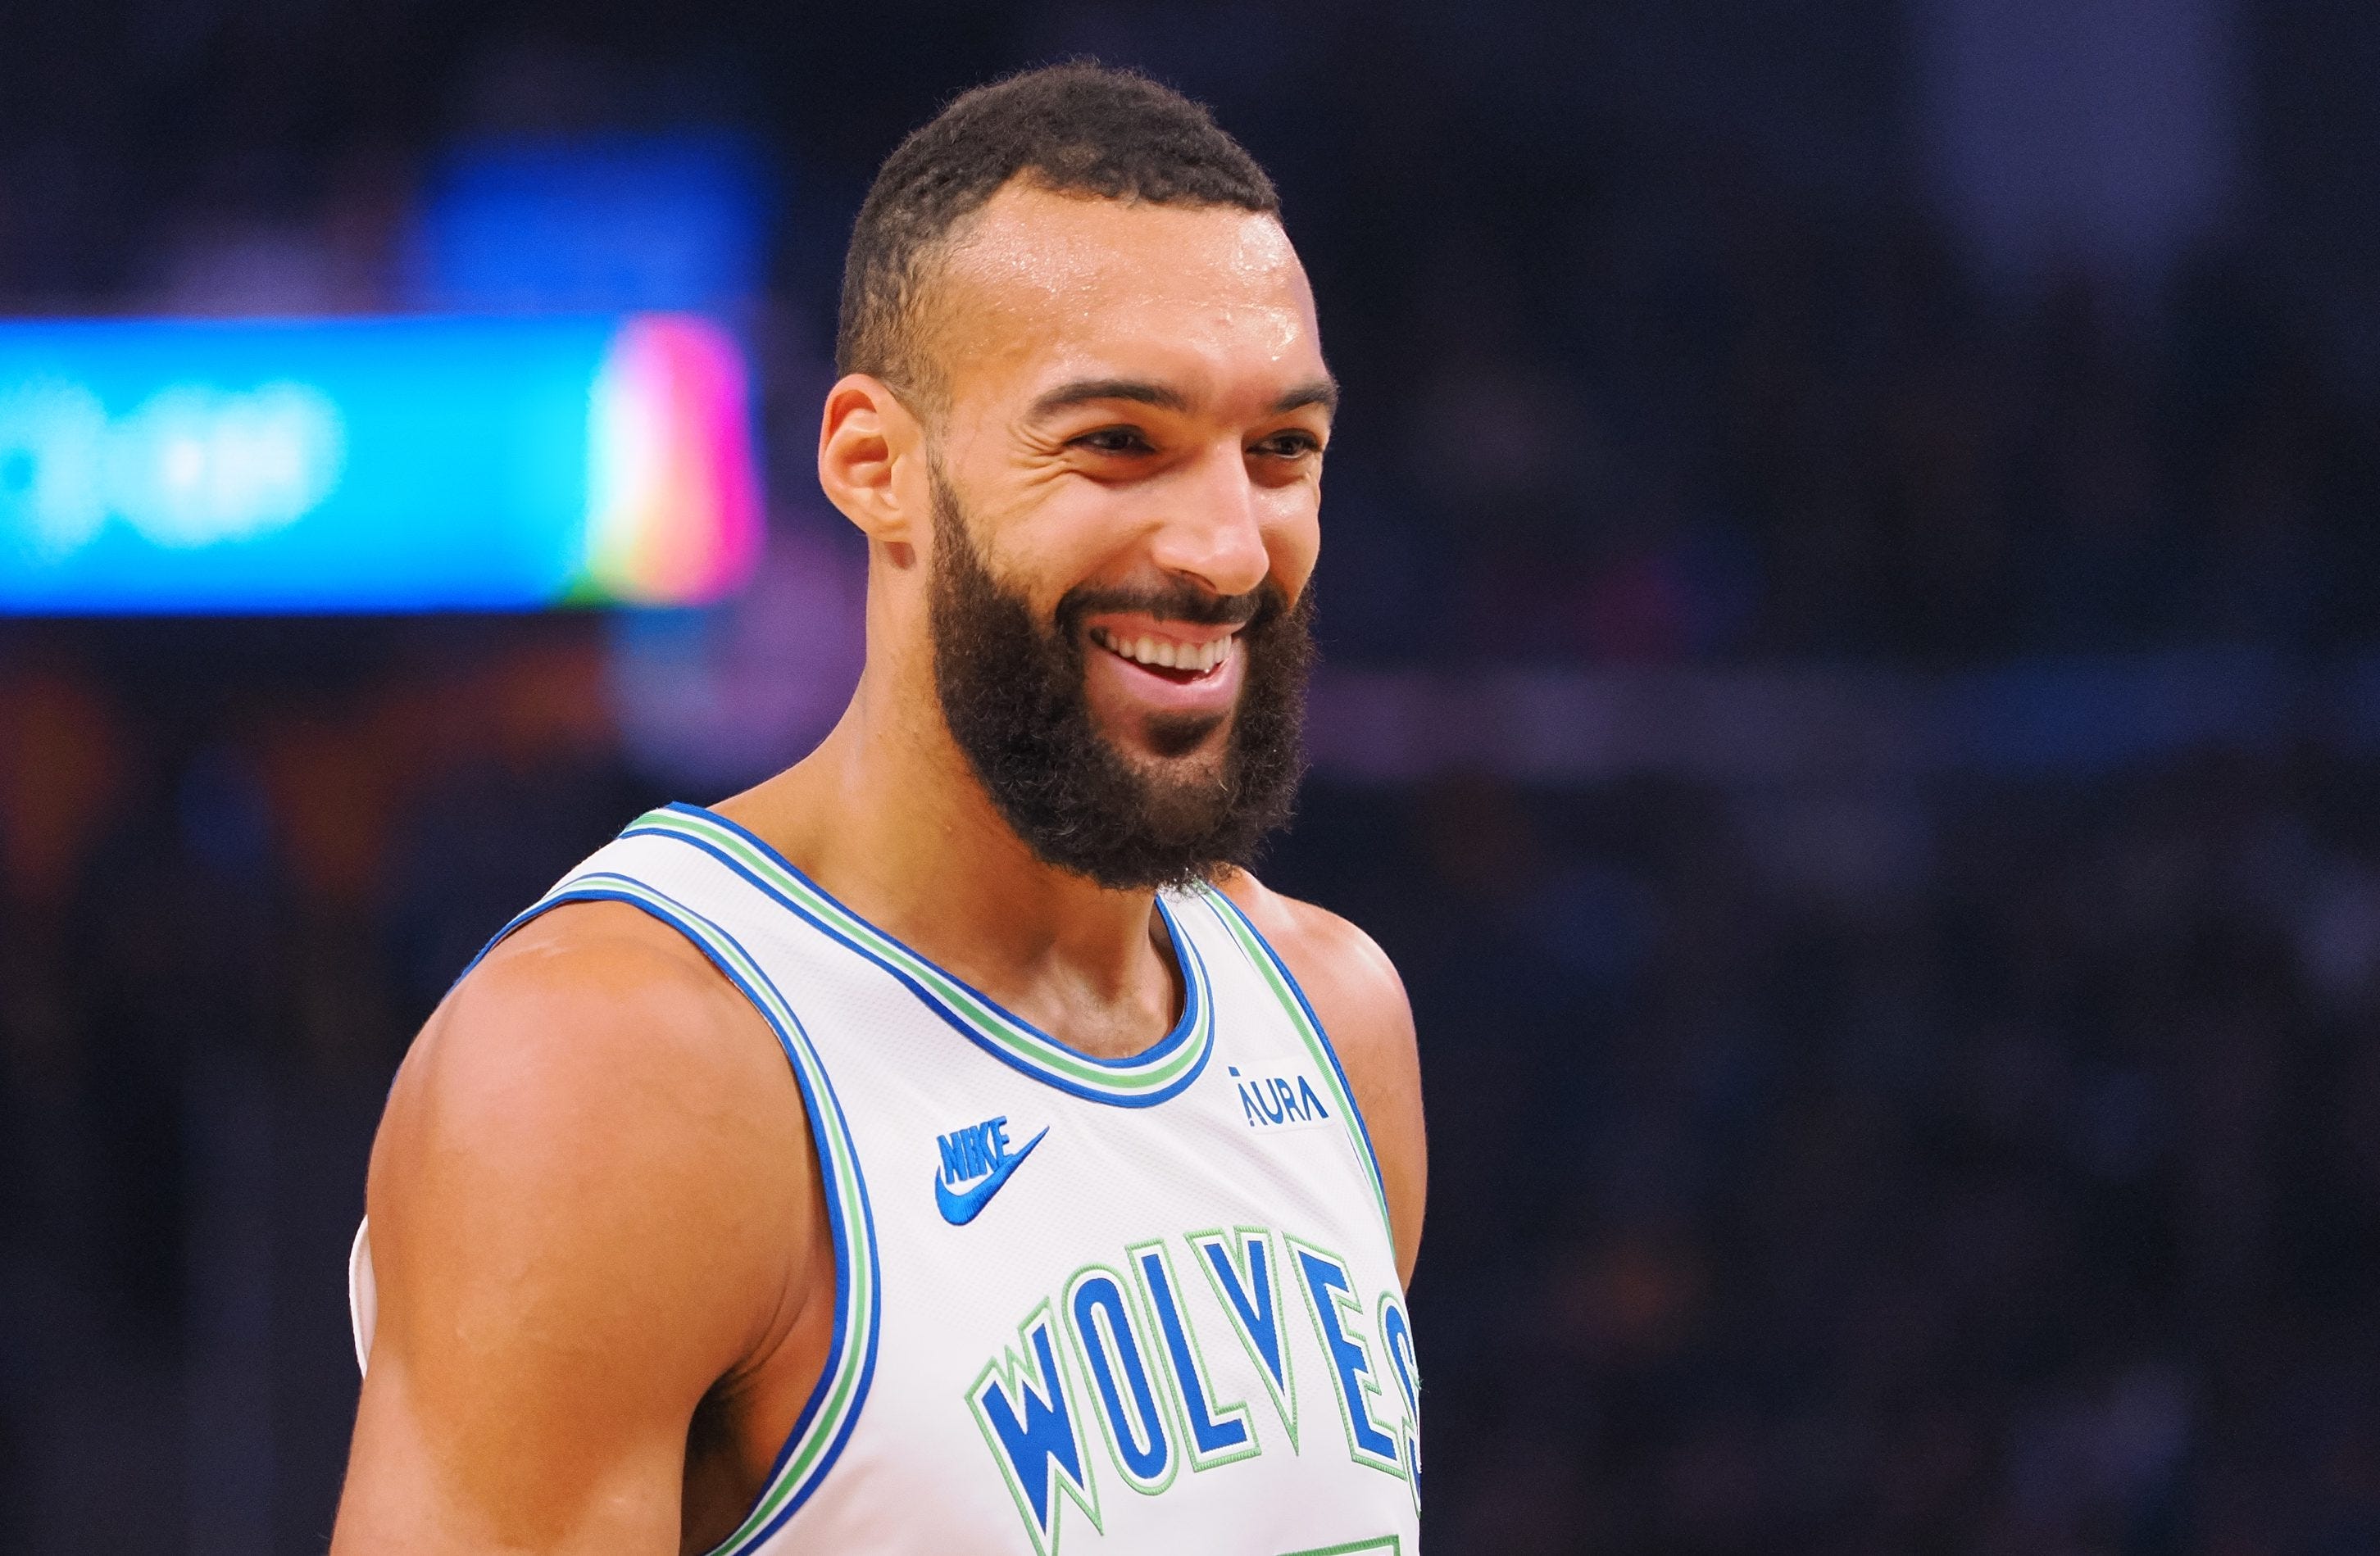 rudy gobert’s quote about the timberwolves finally ‘embracing’ him is so telling